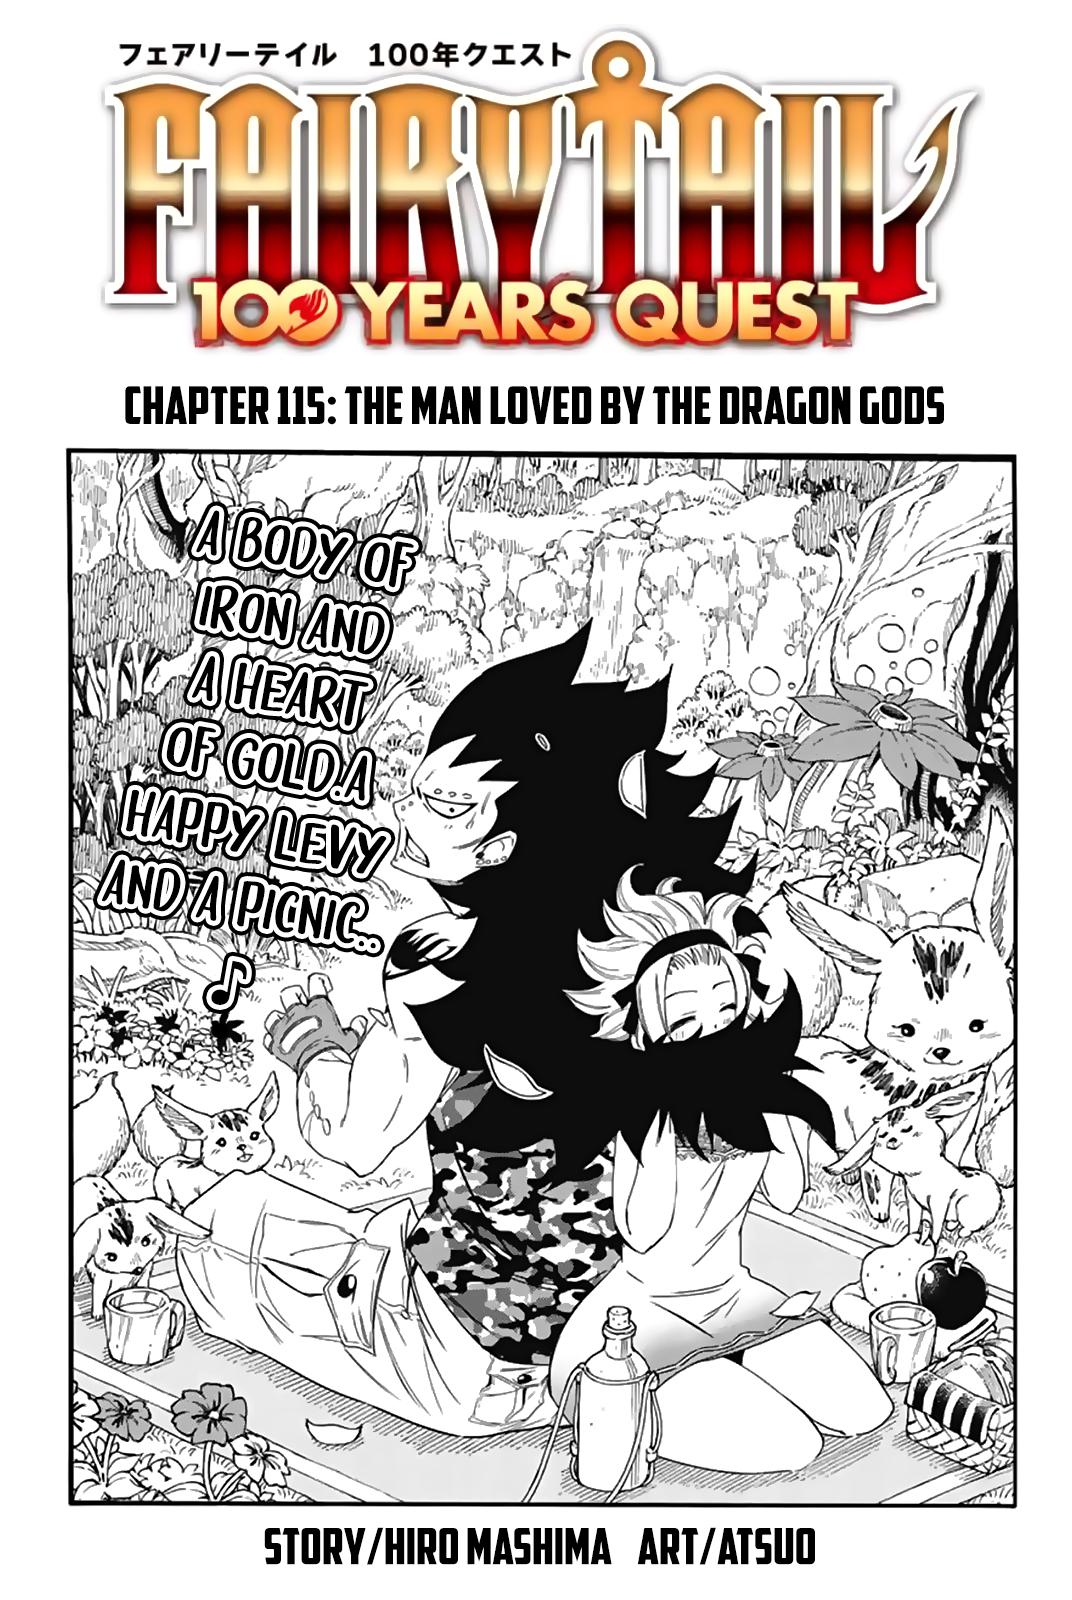 Otaku Nuts: Fairy Tail 100 Years Quest Chapter 69 and Eden's Zero Chapters  118 and 119 Review